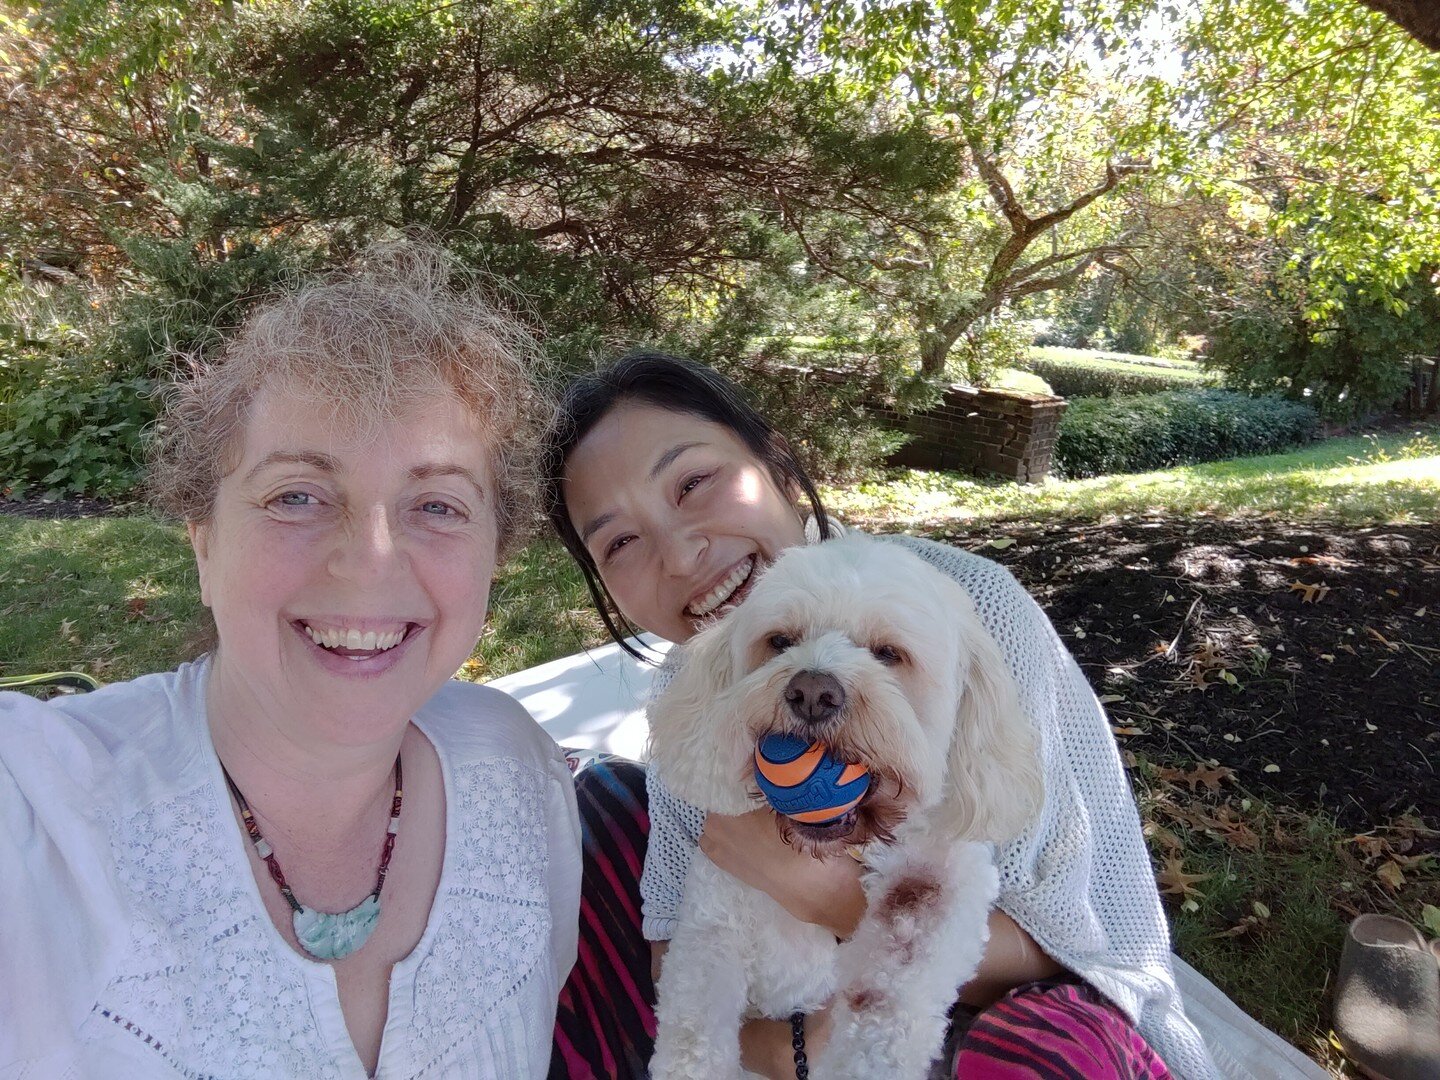 Gorgeous day at Mellon Park for Qi Gong, Tree Chats, and an introduction to Light Language! Thanks Junko and Smiley! ❤️ I will post more dates for these gatherings!